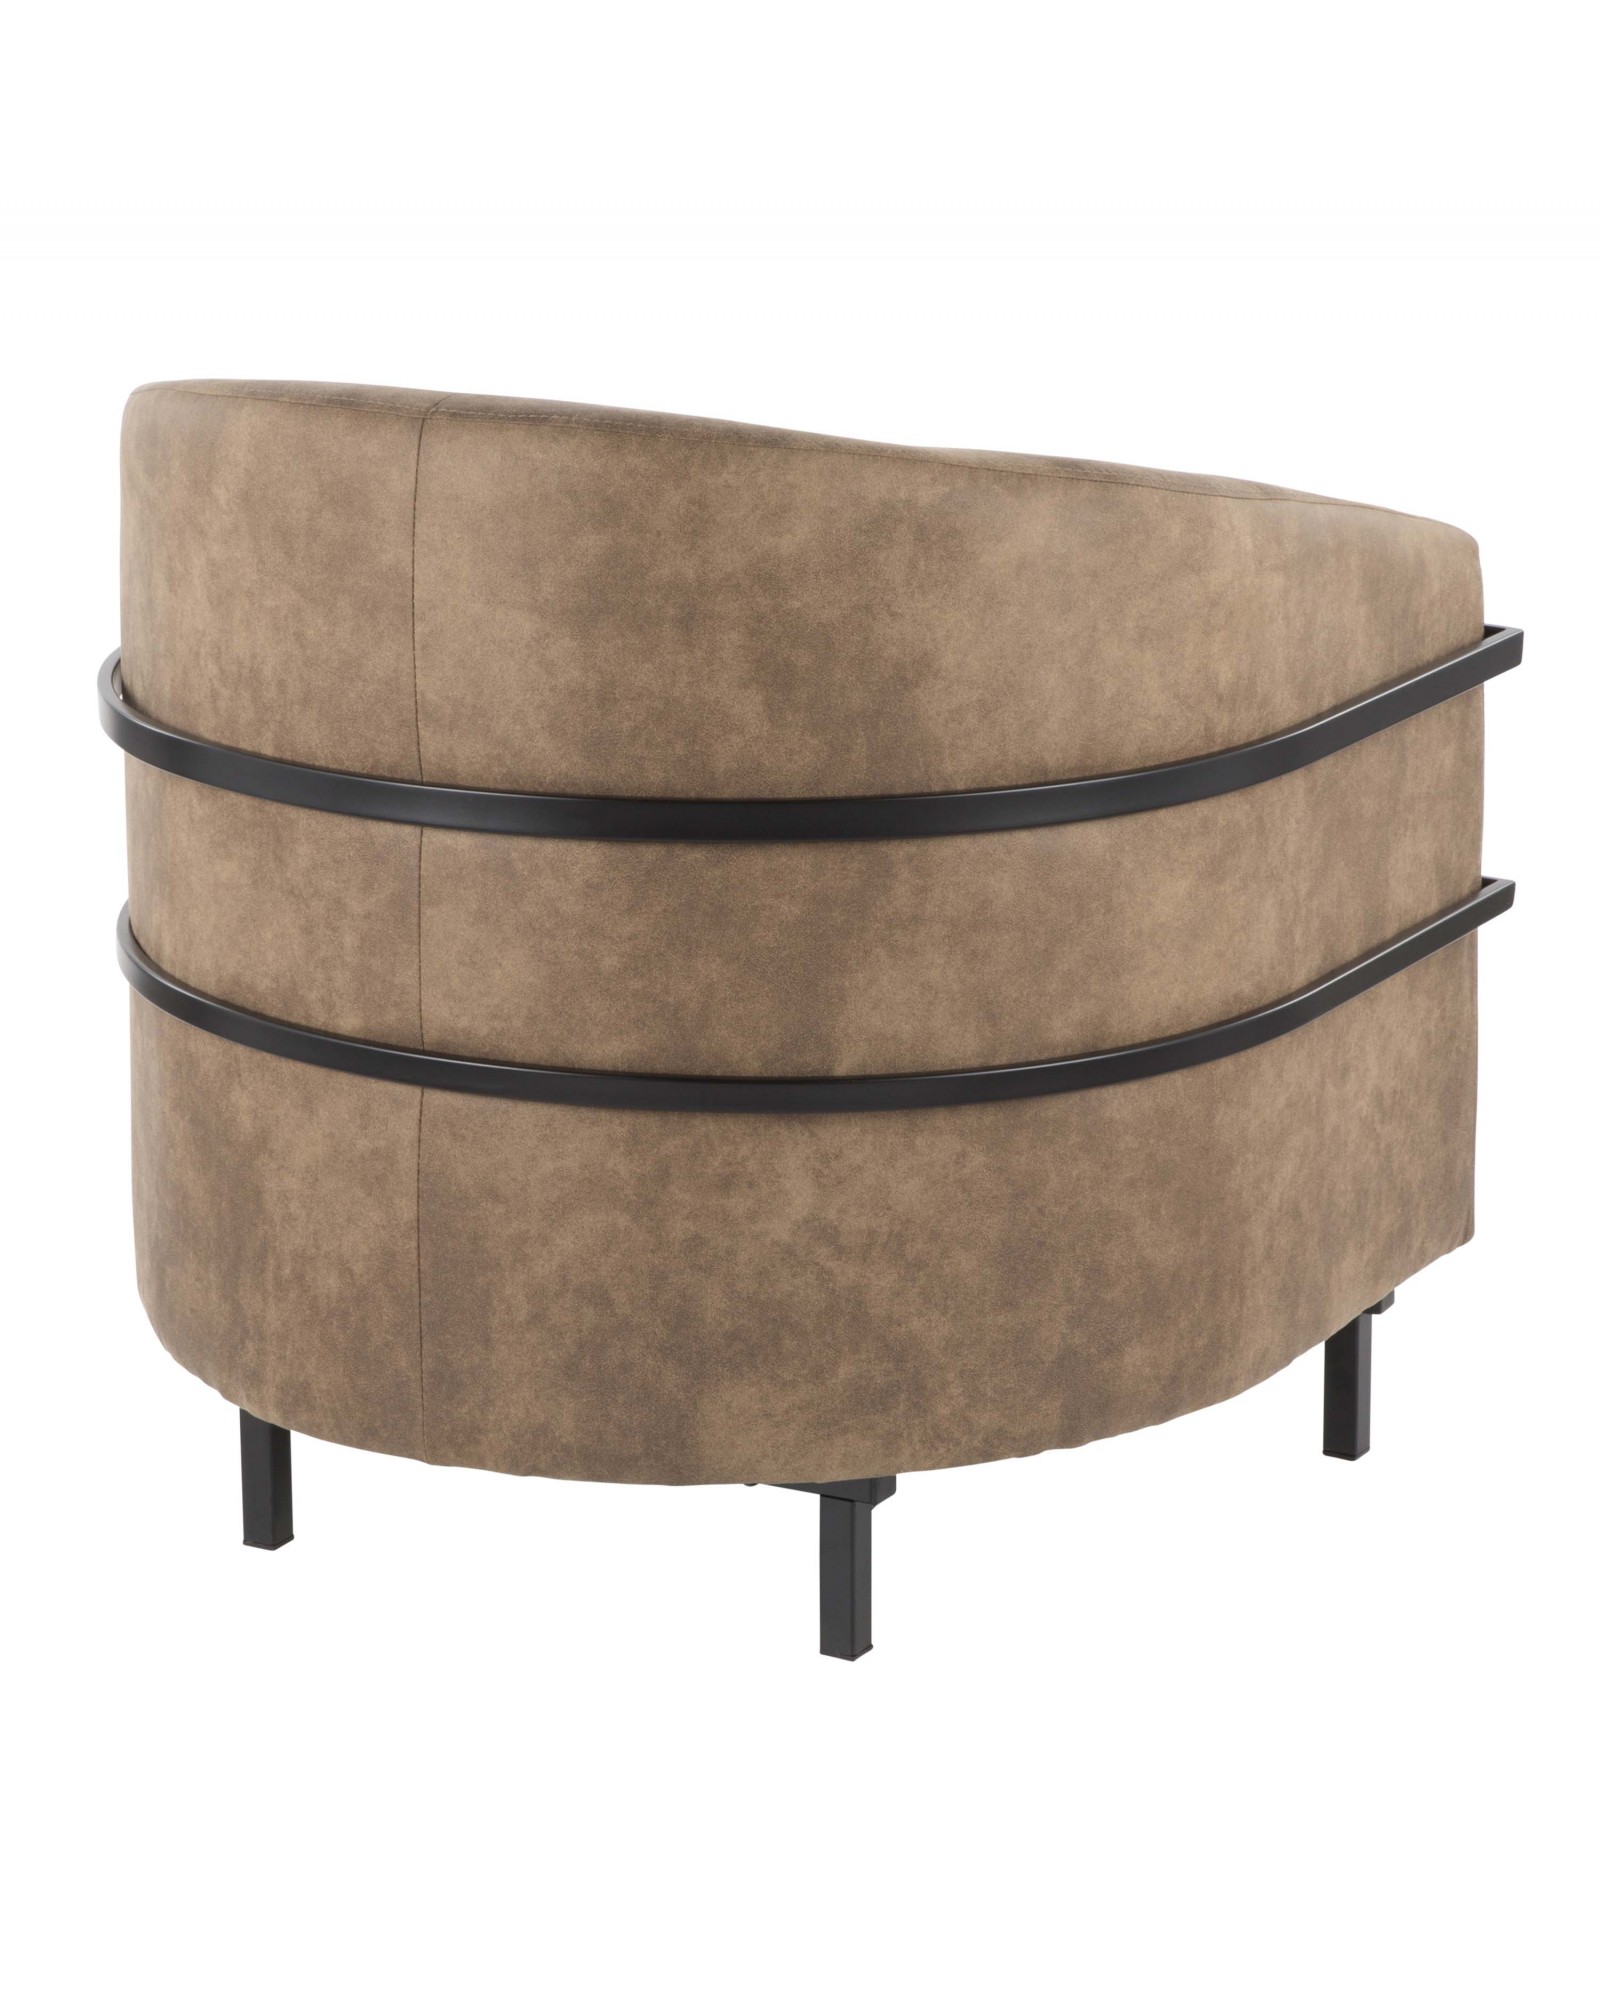 Colby Industrial Tub Chair in Black with Brown Cowboy Fabric